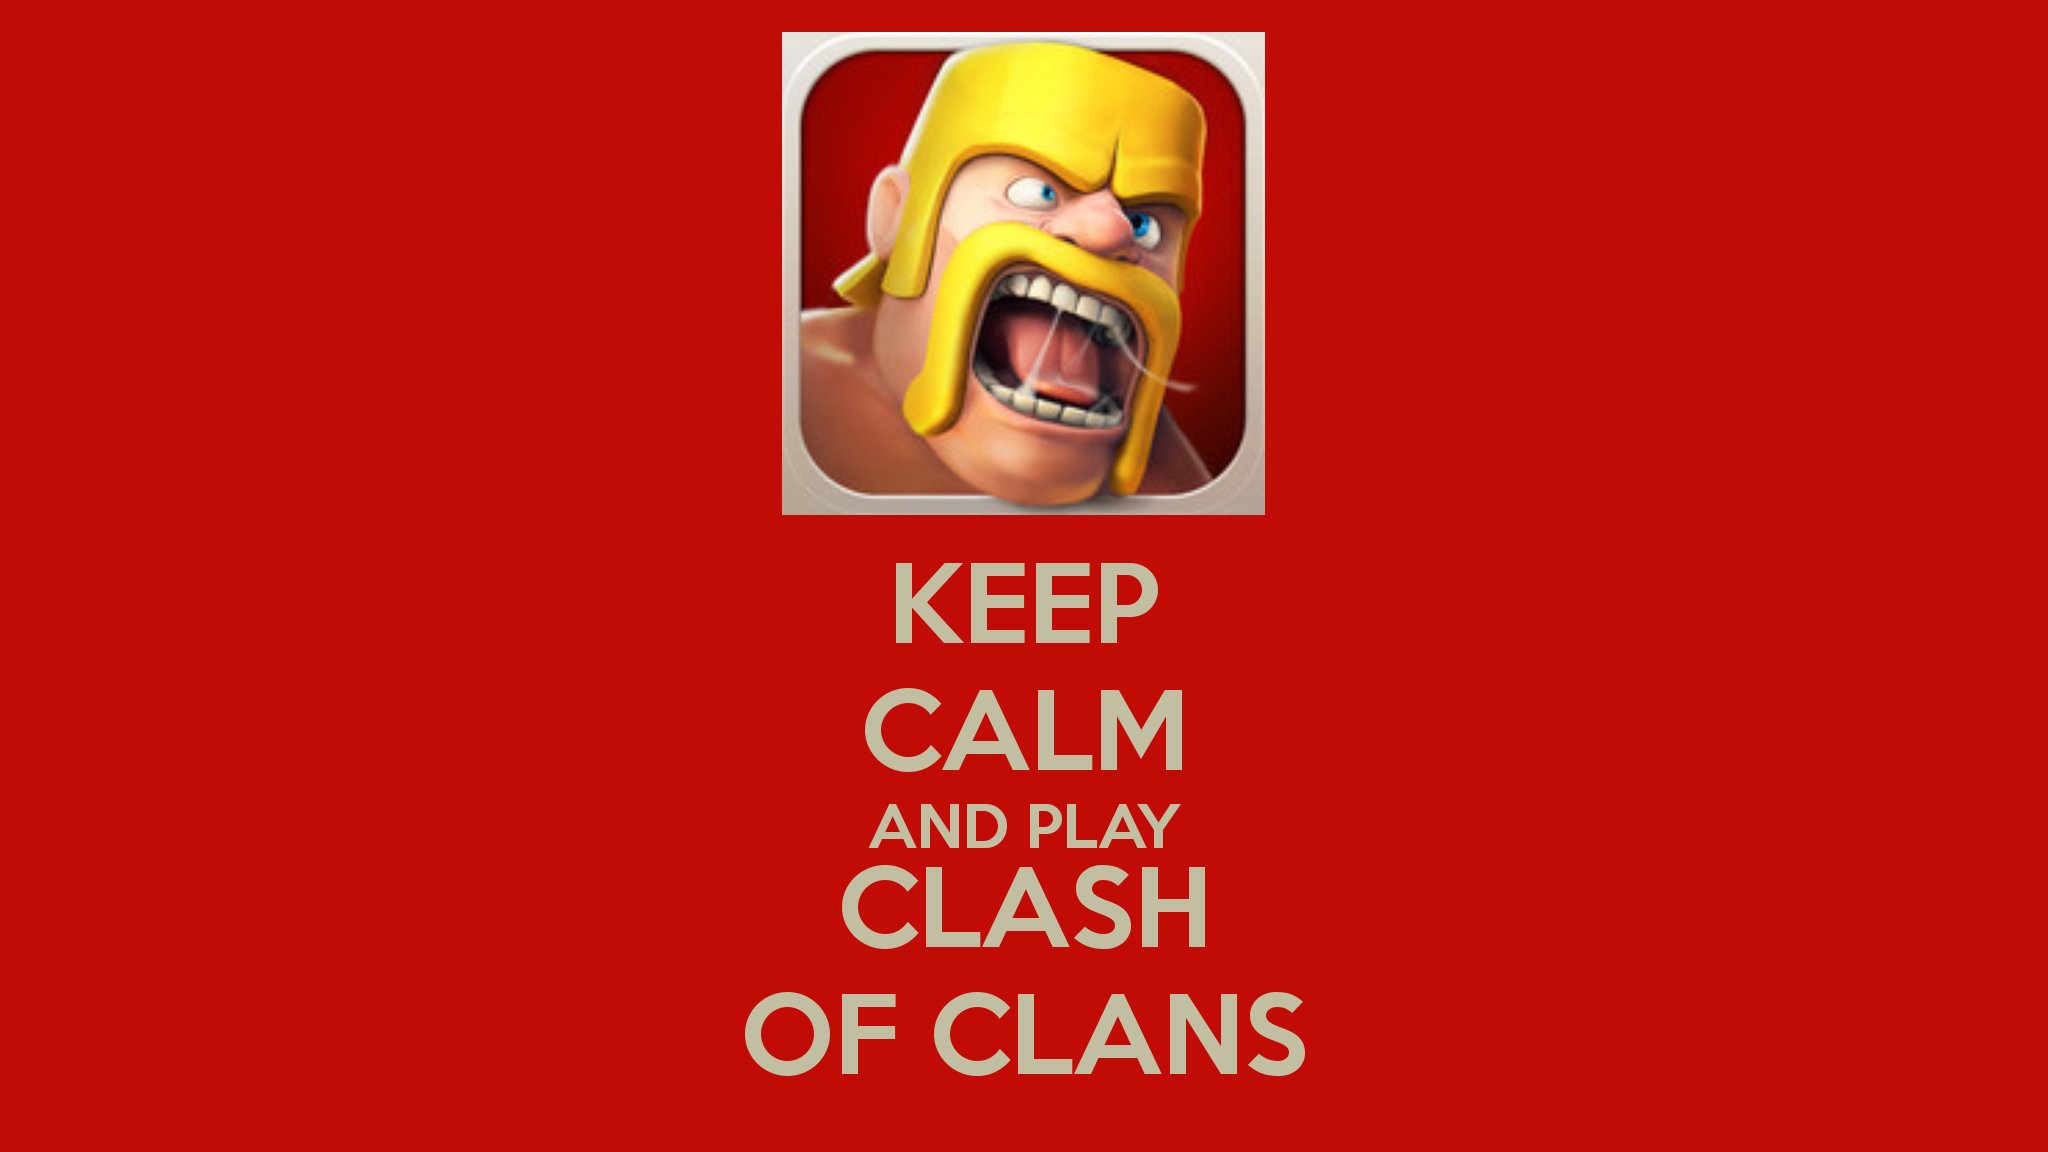 clash, Of, Clans, Fantasy, Fighting, Family, Action, Adventure, Strategy, 1clashclans, Warrior, Poster, Keep, Calm Wallpaper